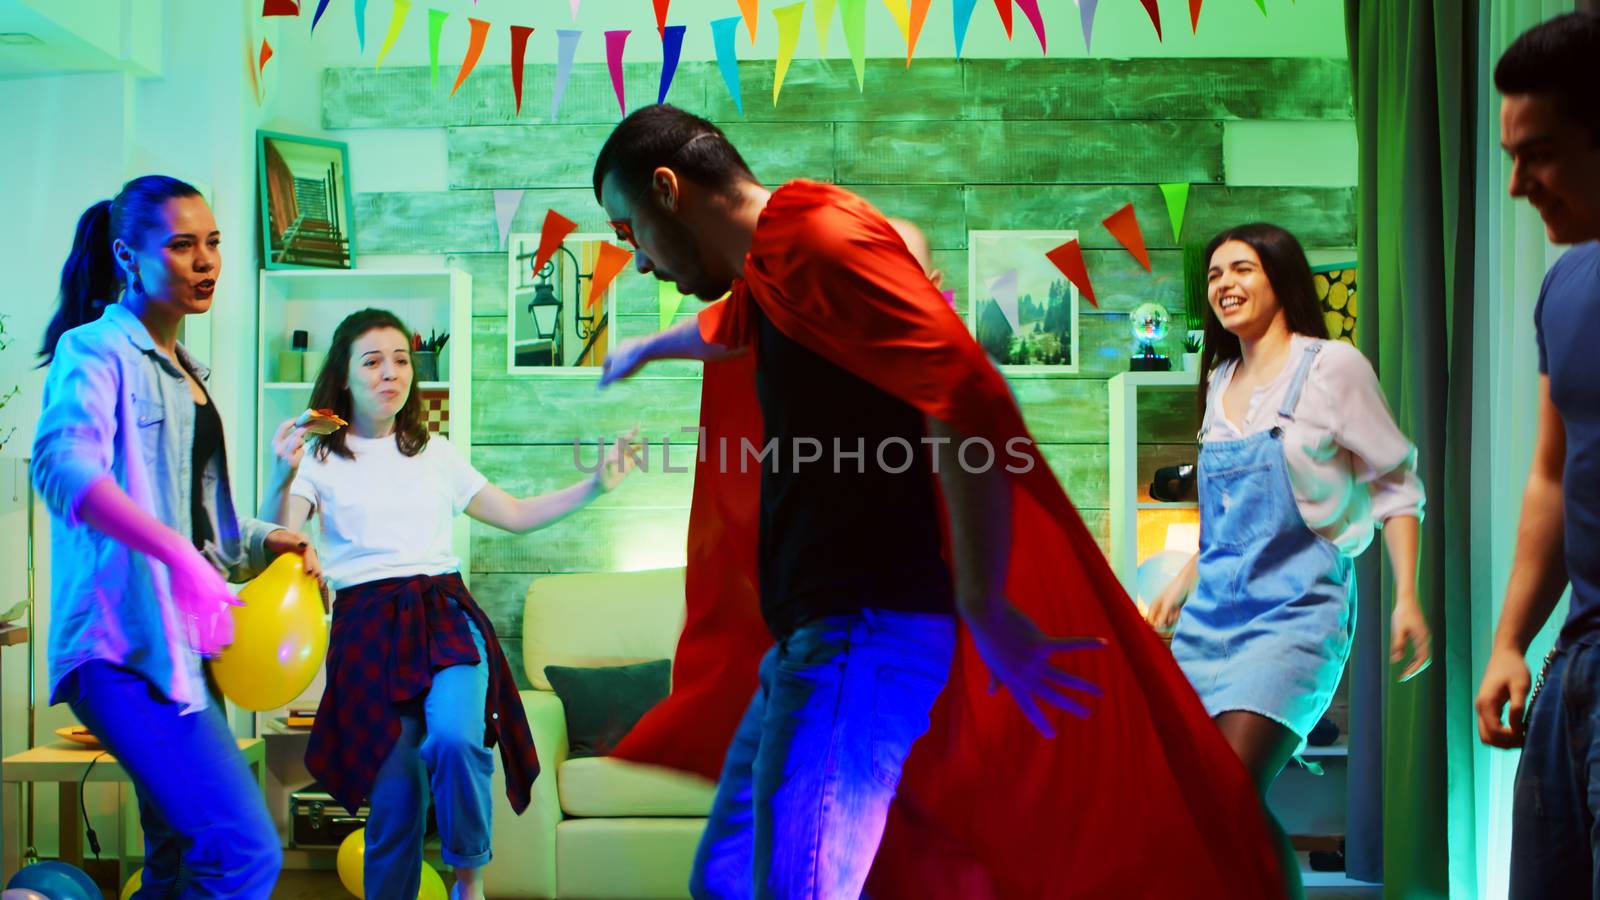 Handsome young man arriving at the party wearing a superhero red cape. Wild college party with neon lights, disco ball and alcohol